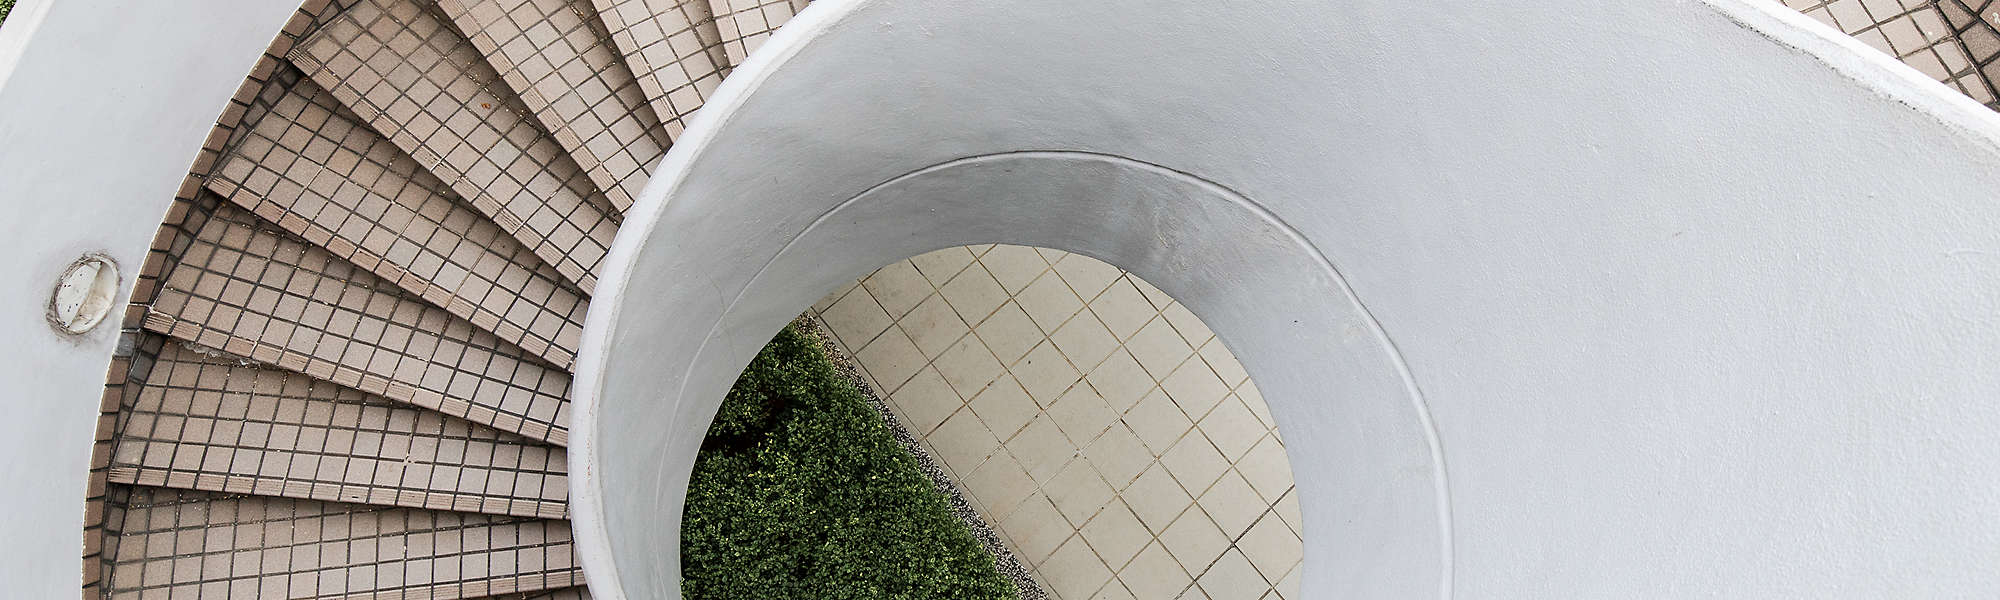 Overhead view of an empty outdoor spiral staircase with white tile.